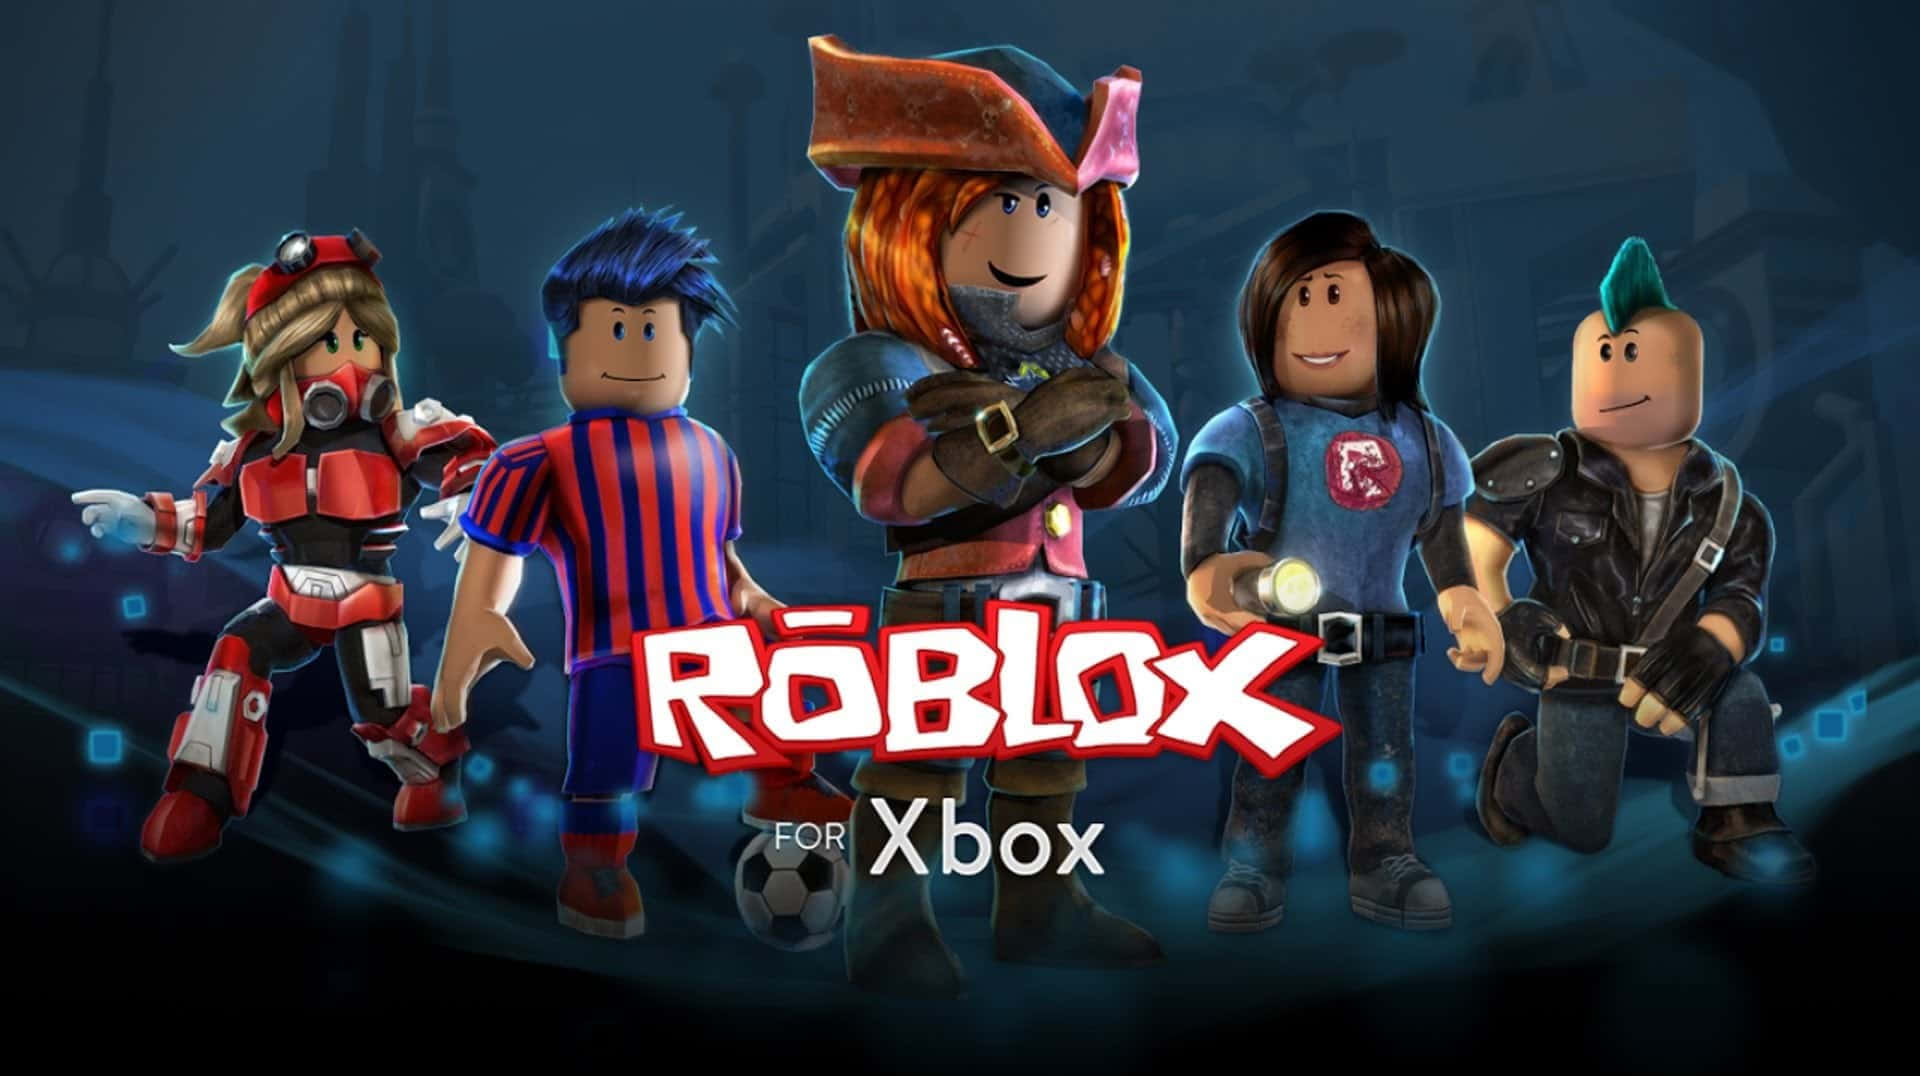 Caption: "fun And Adventure With Cute Roblox Avatar"